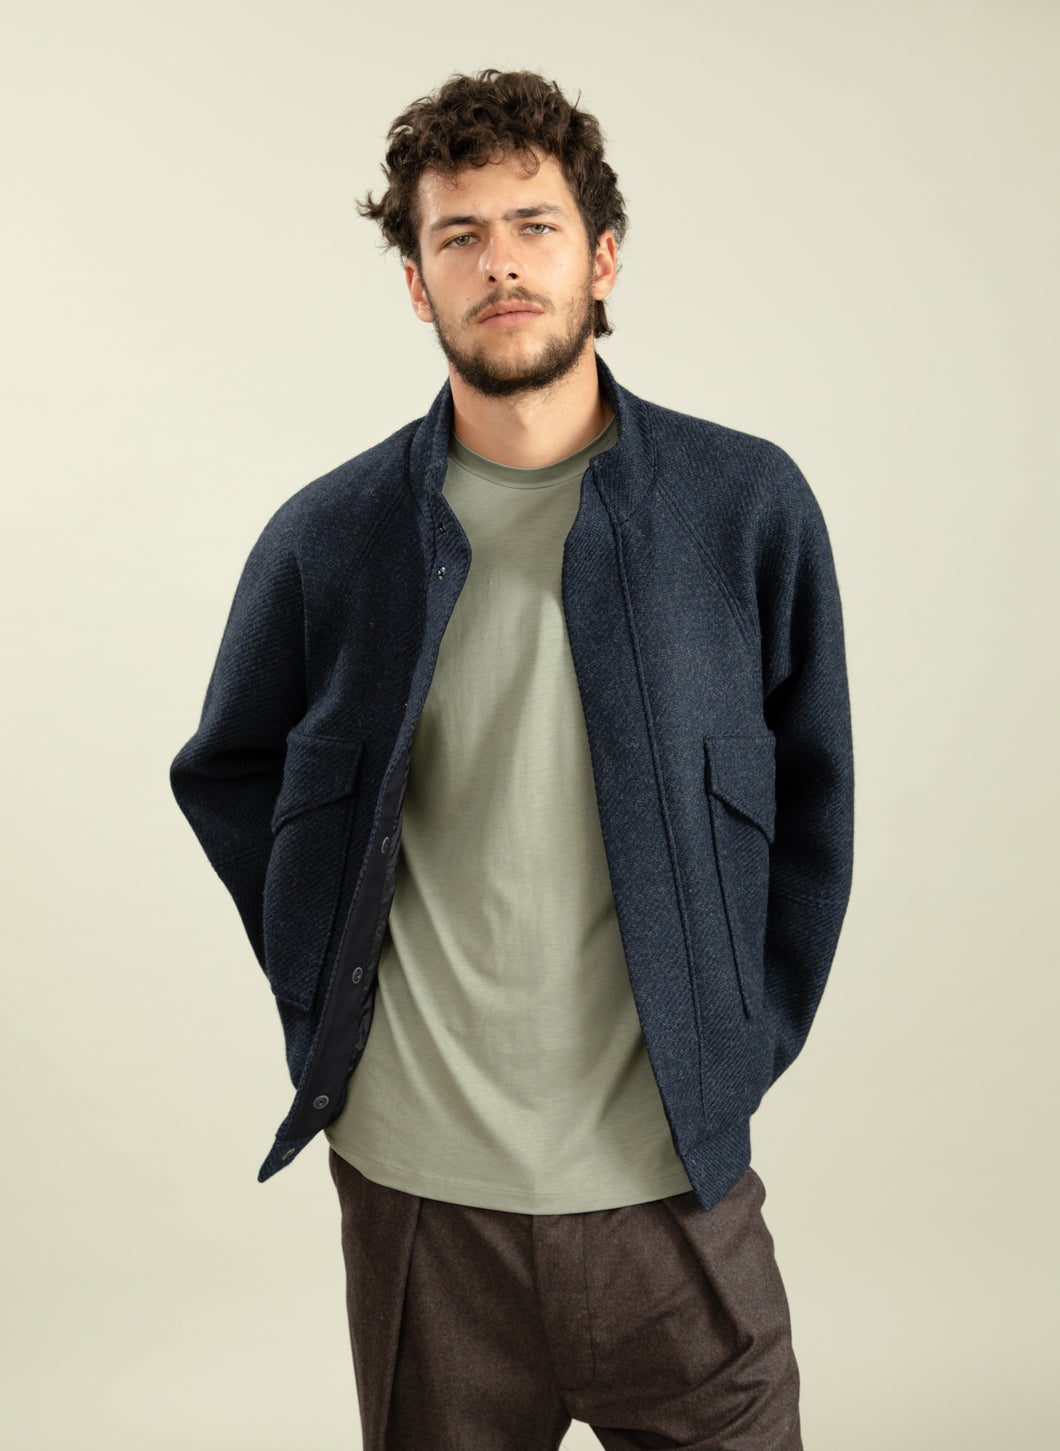 Bomber Jacket with Origami Collar in Navy Blue Italian Wool